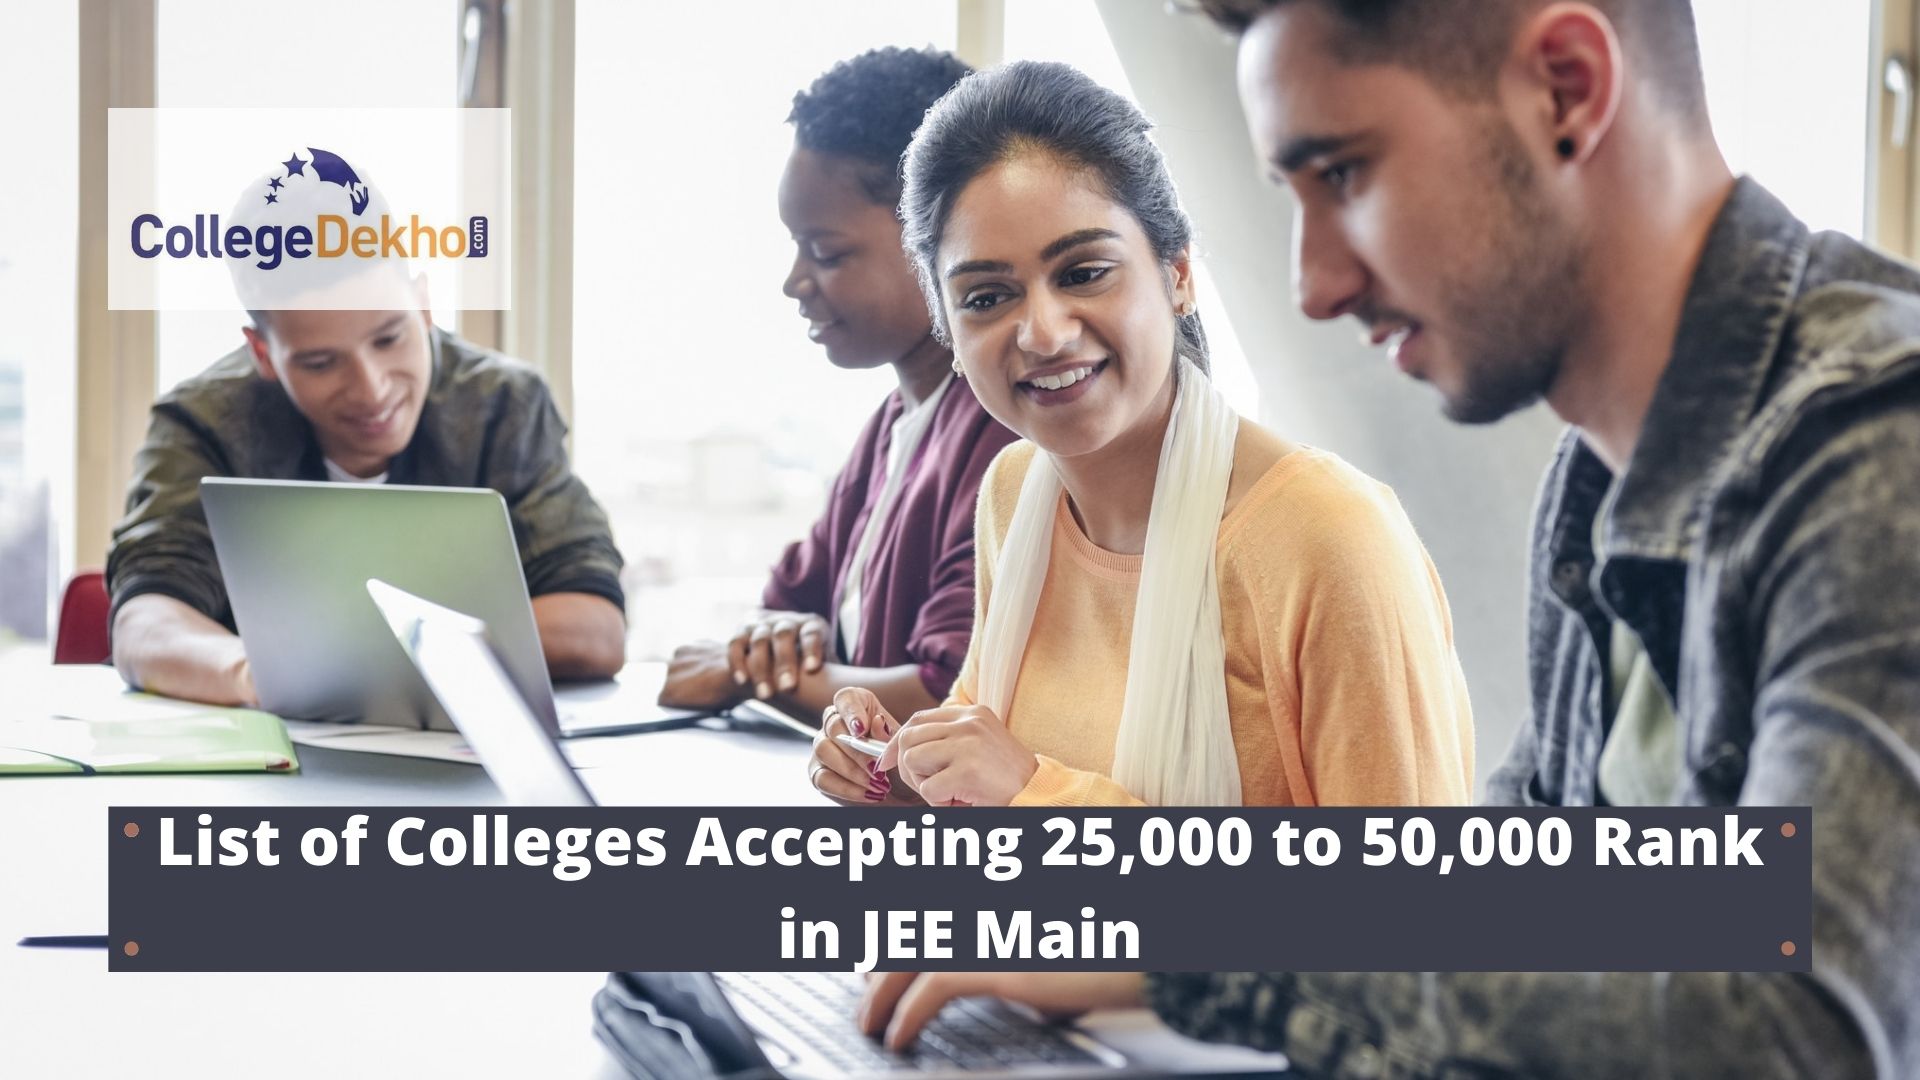 List of Colleges Accepting 25,000 to 50,000 Rank in JEE Main 2022